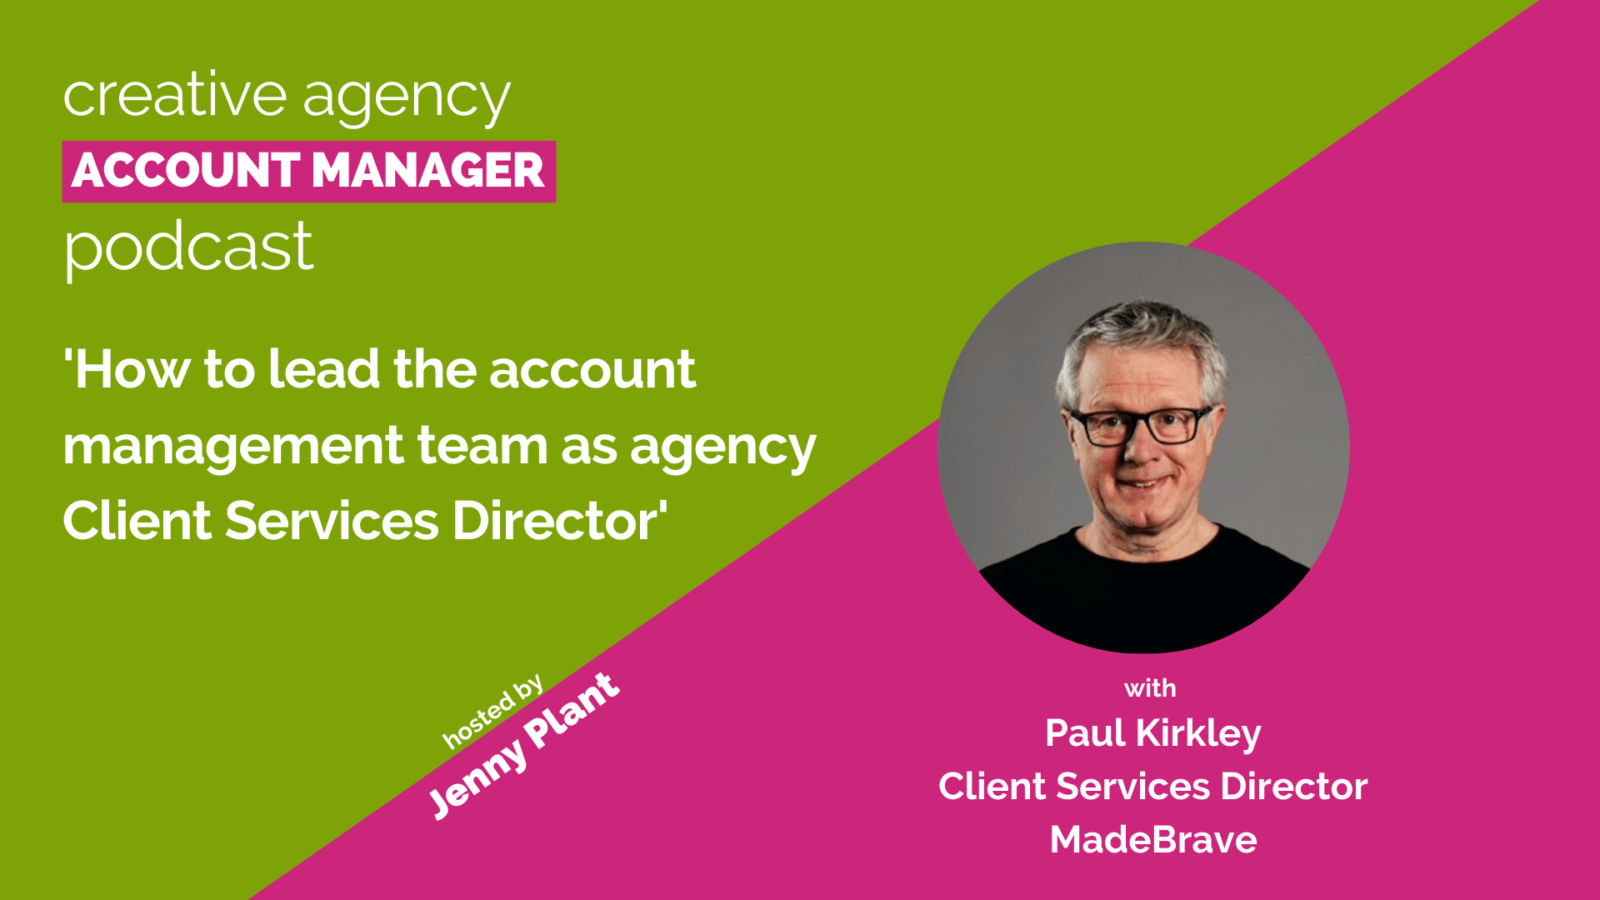 How to lead the account management team as Client Services Director